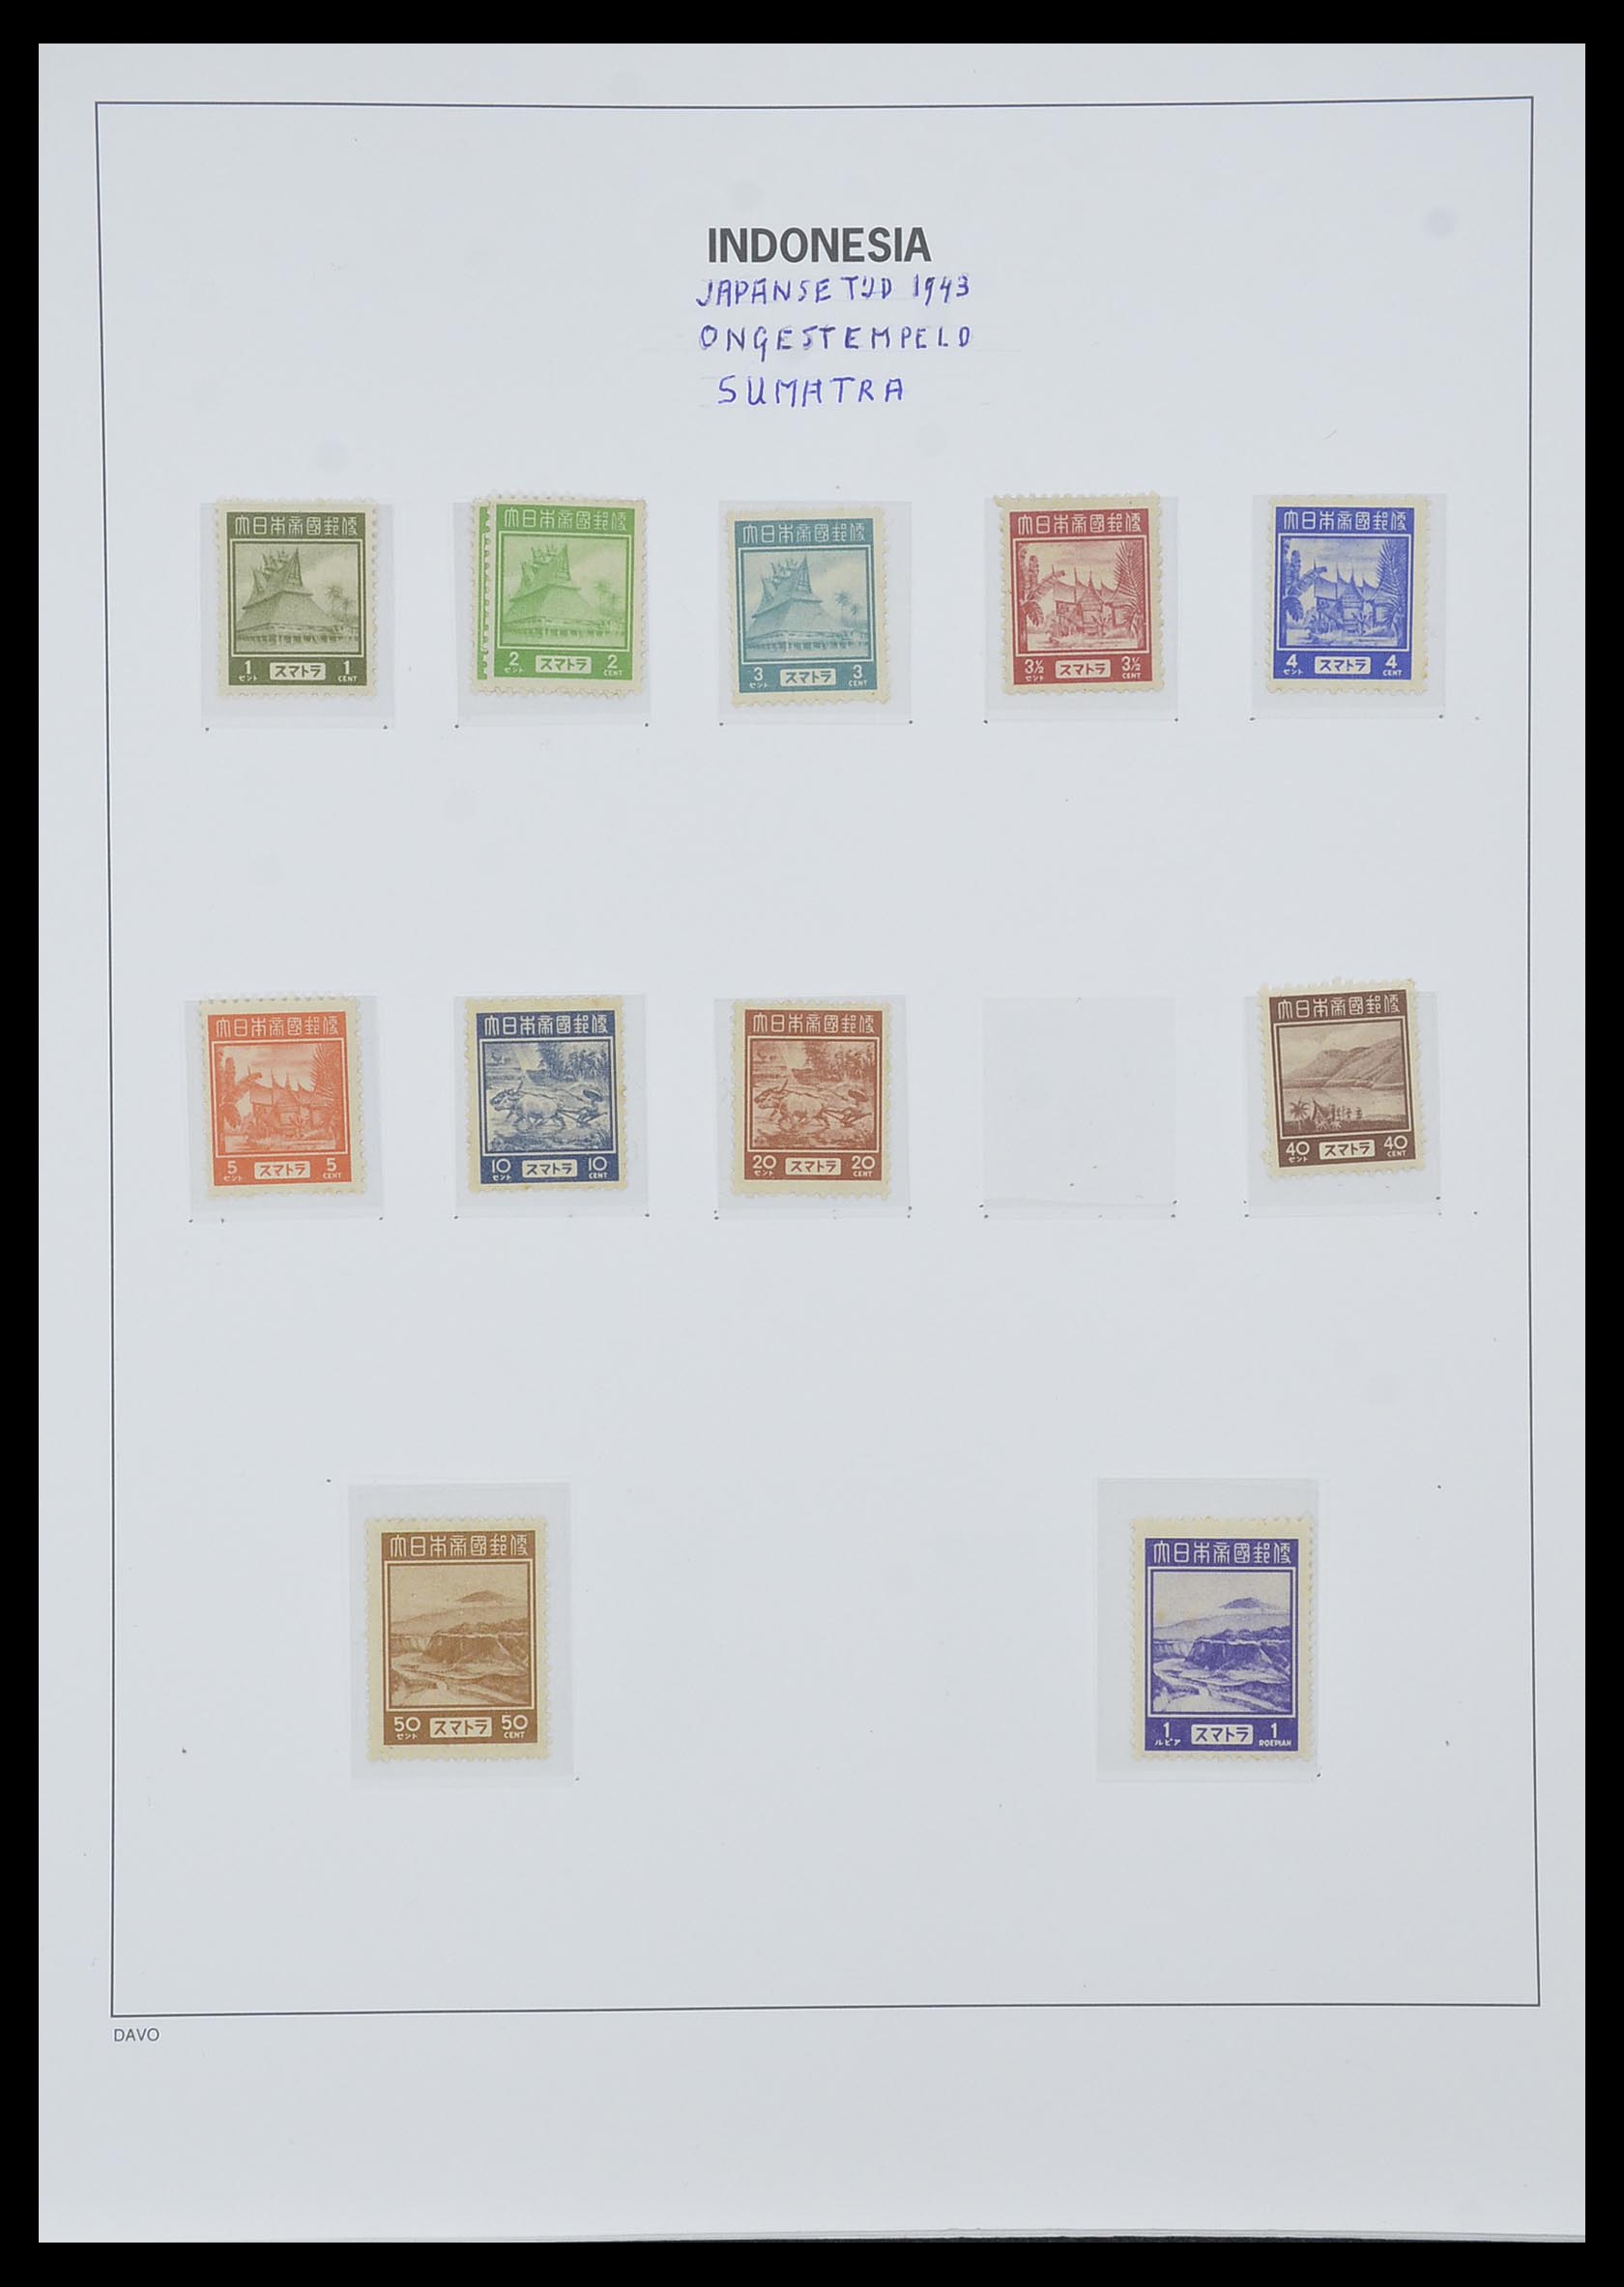 33988 001 - Stamp collection 33988 Vienna printings Indonesia.